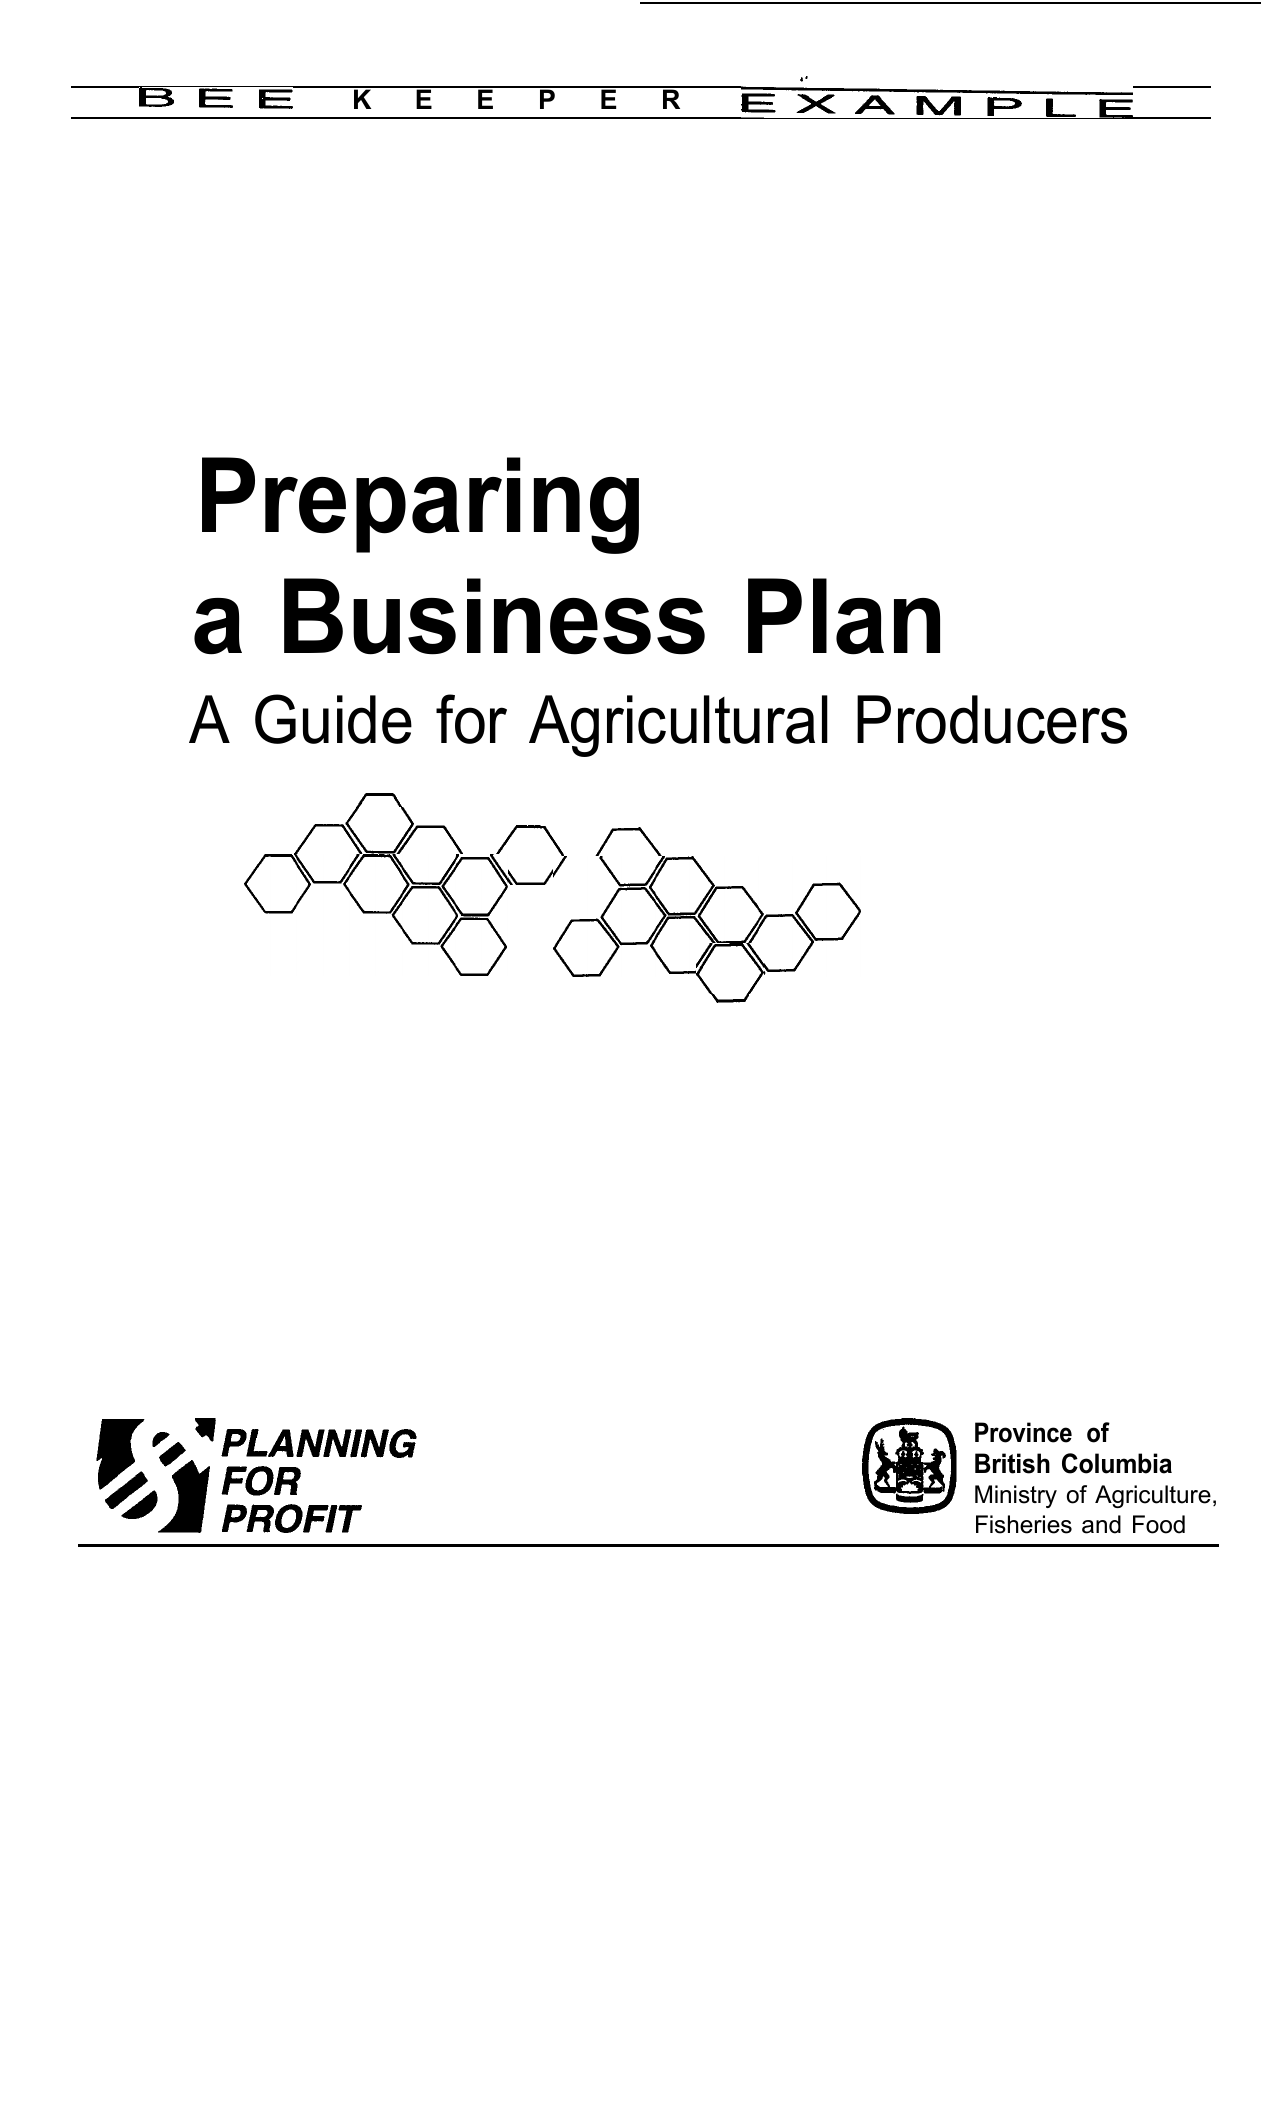 how to write a business plan for beekeeping